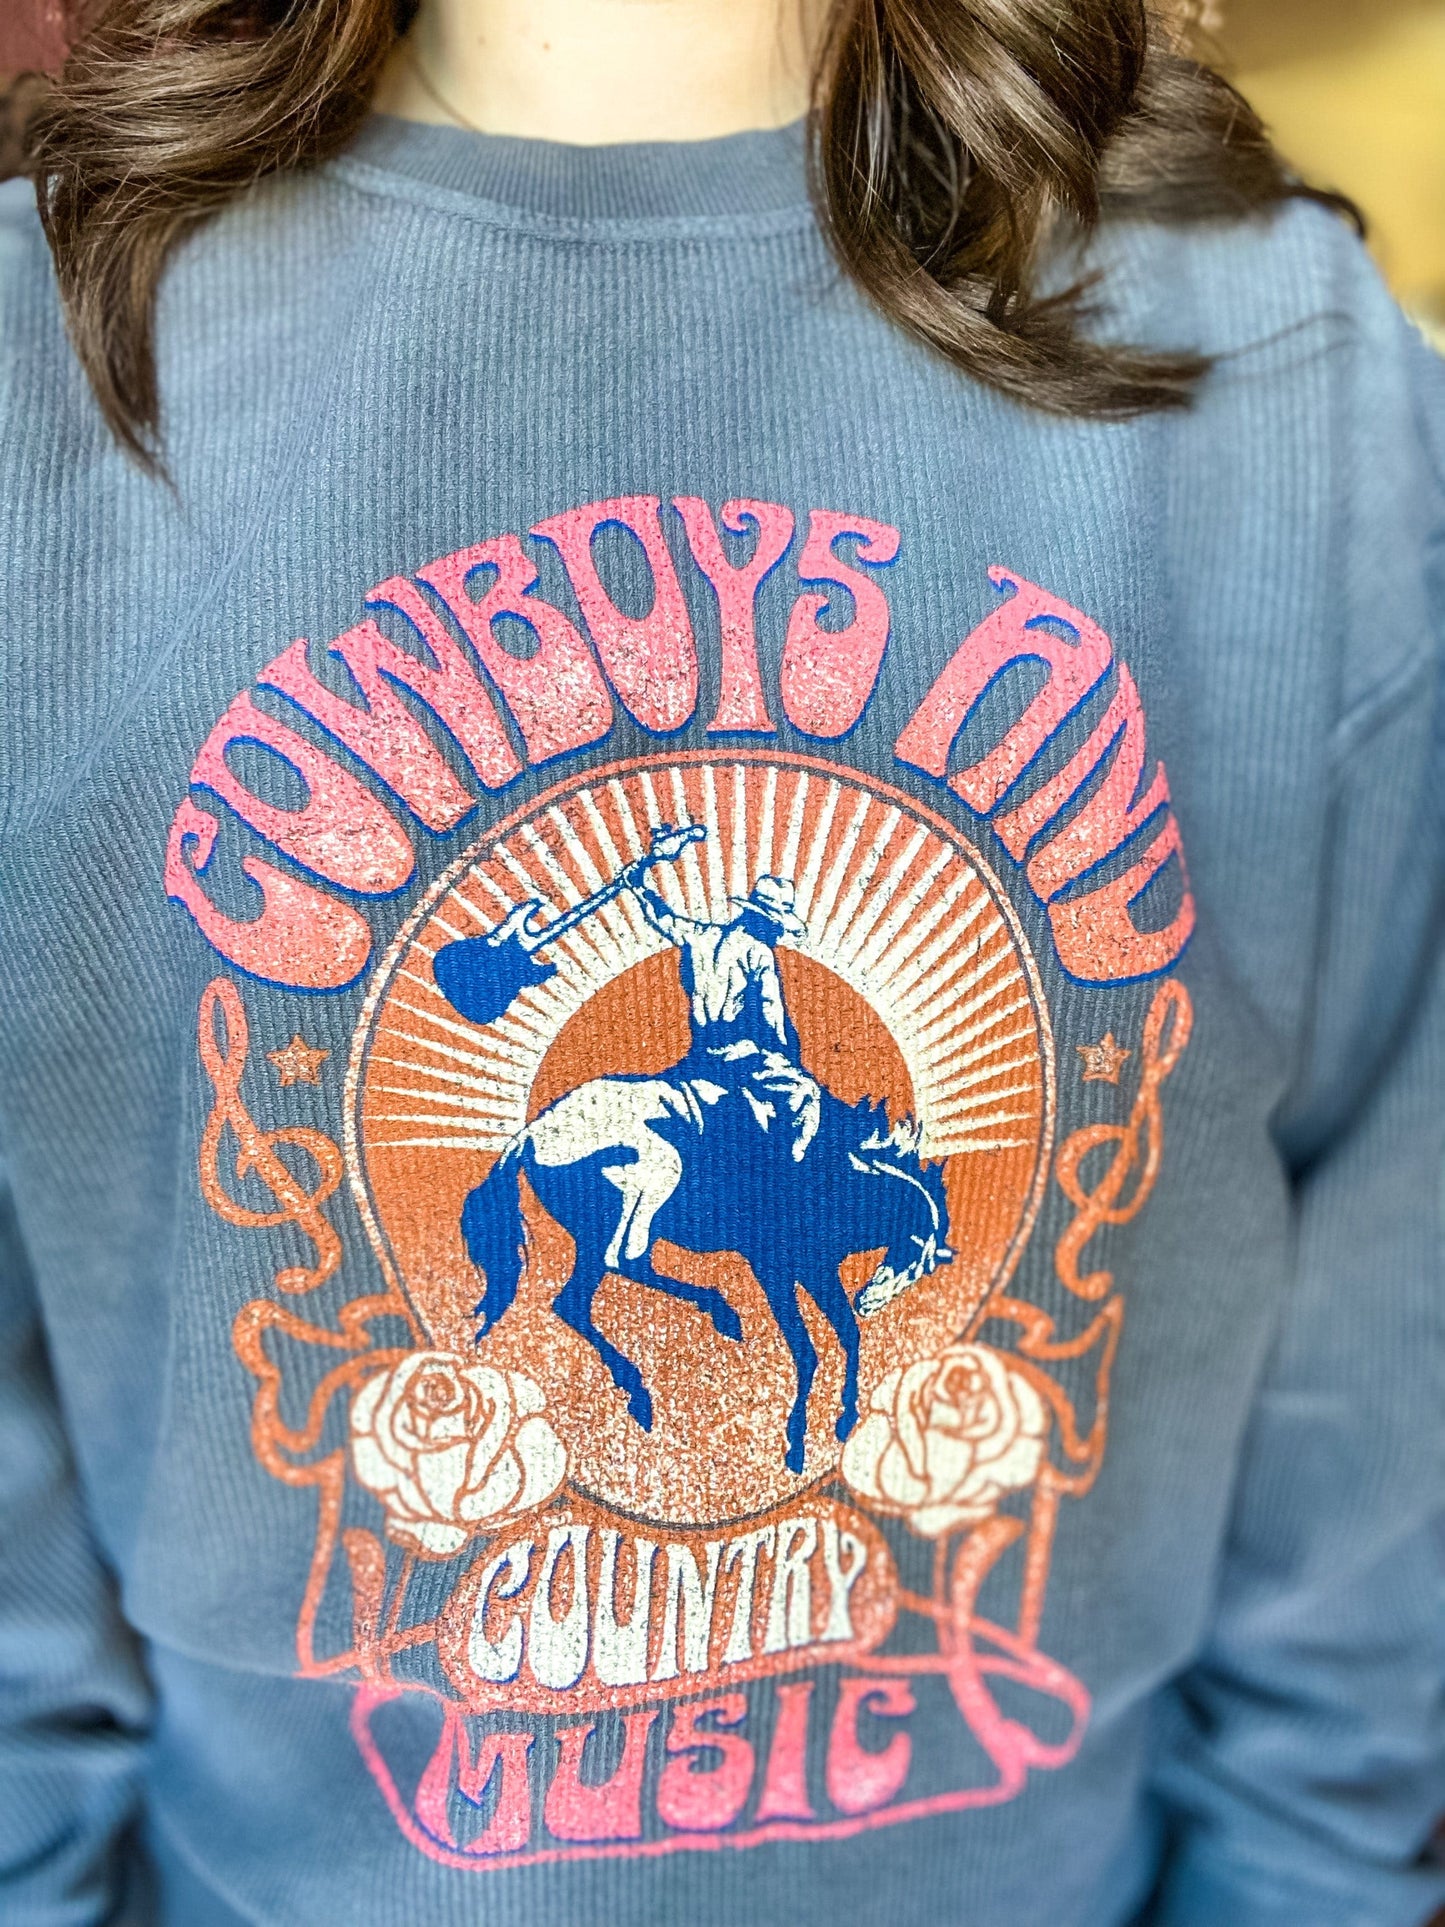 Graphic Tees Cowboys and Country Music Sweatshirt